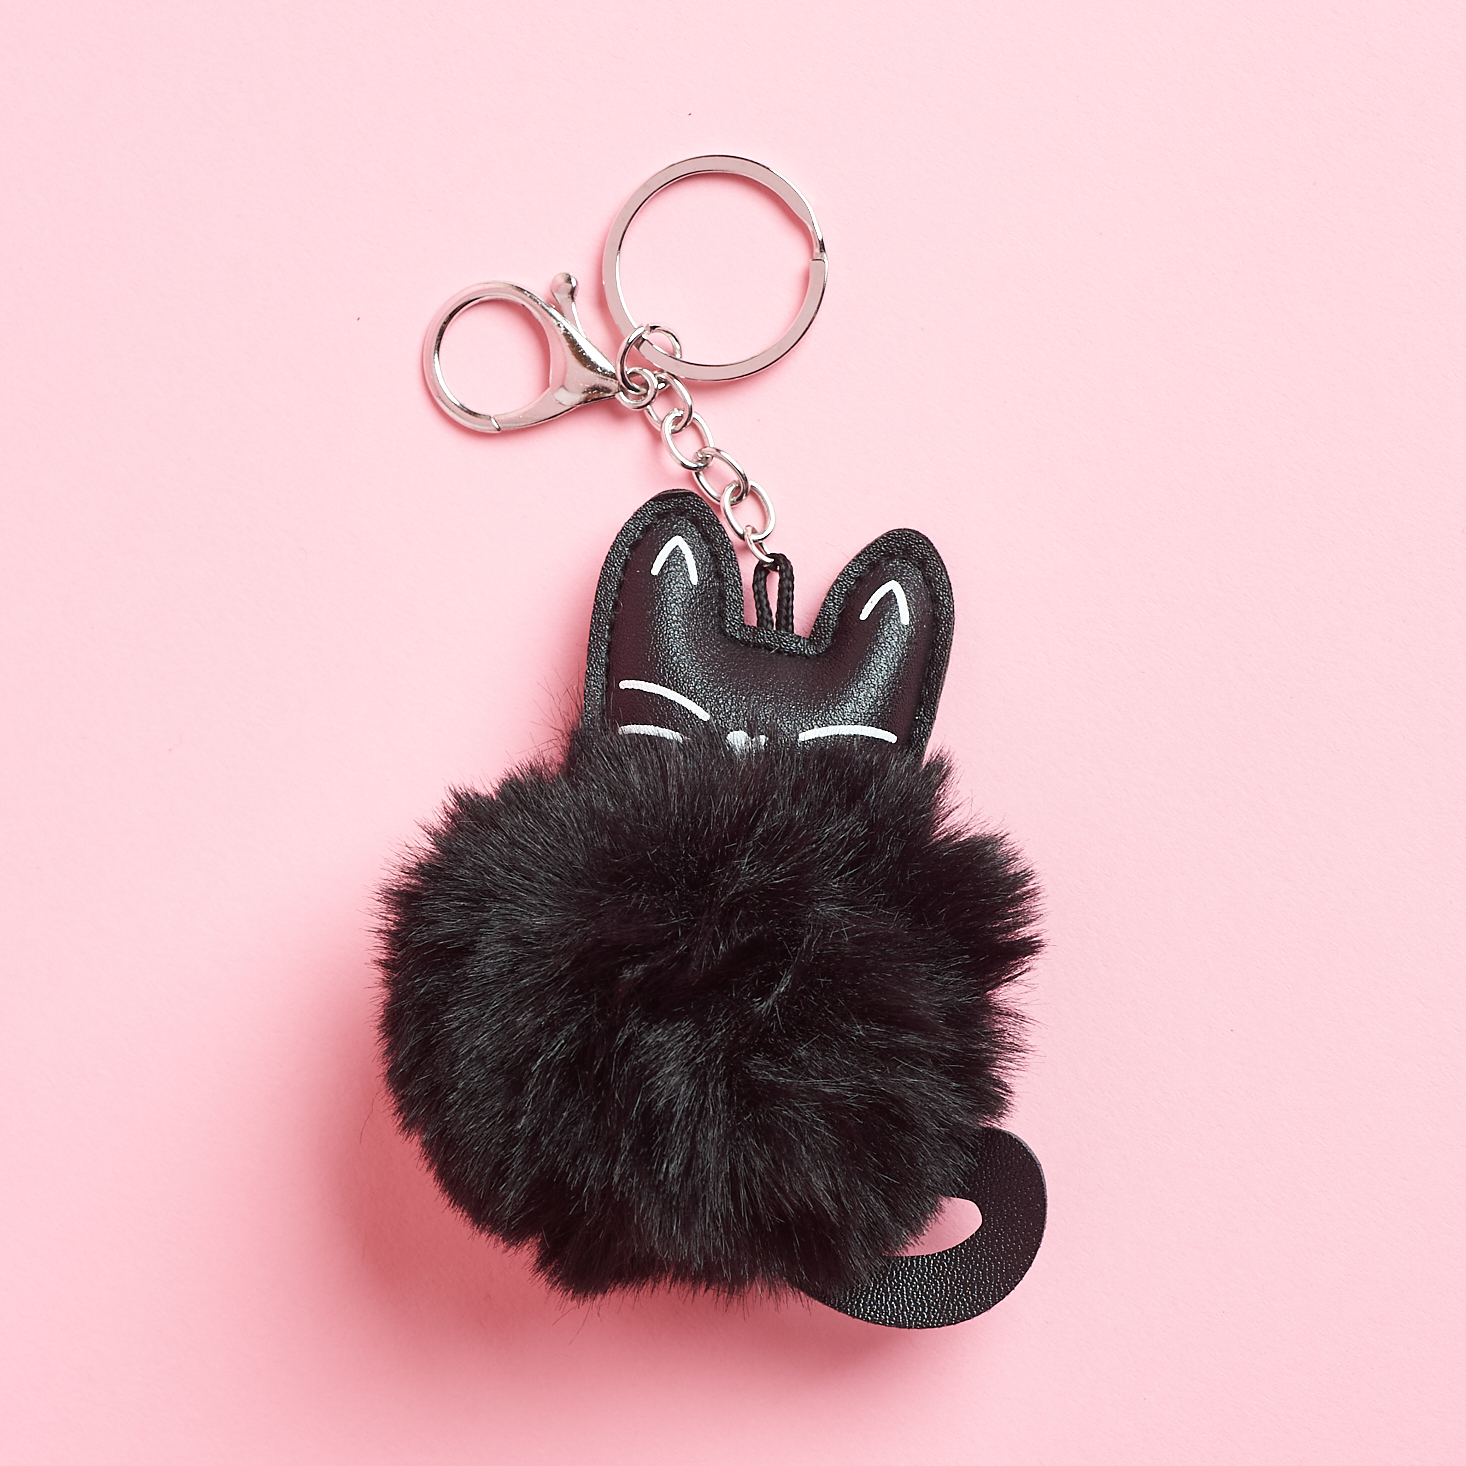 black cat key chain with fluffy puff